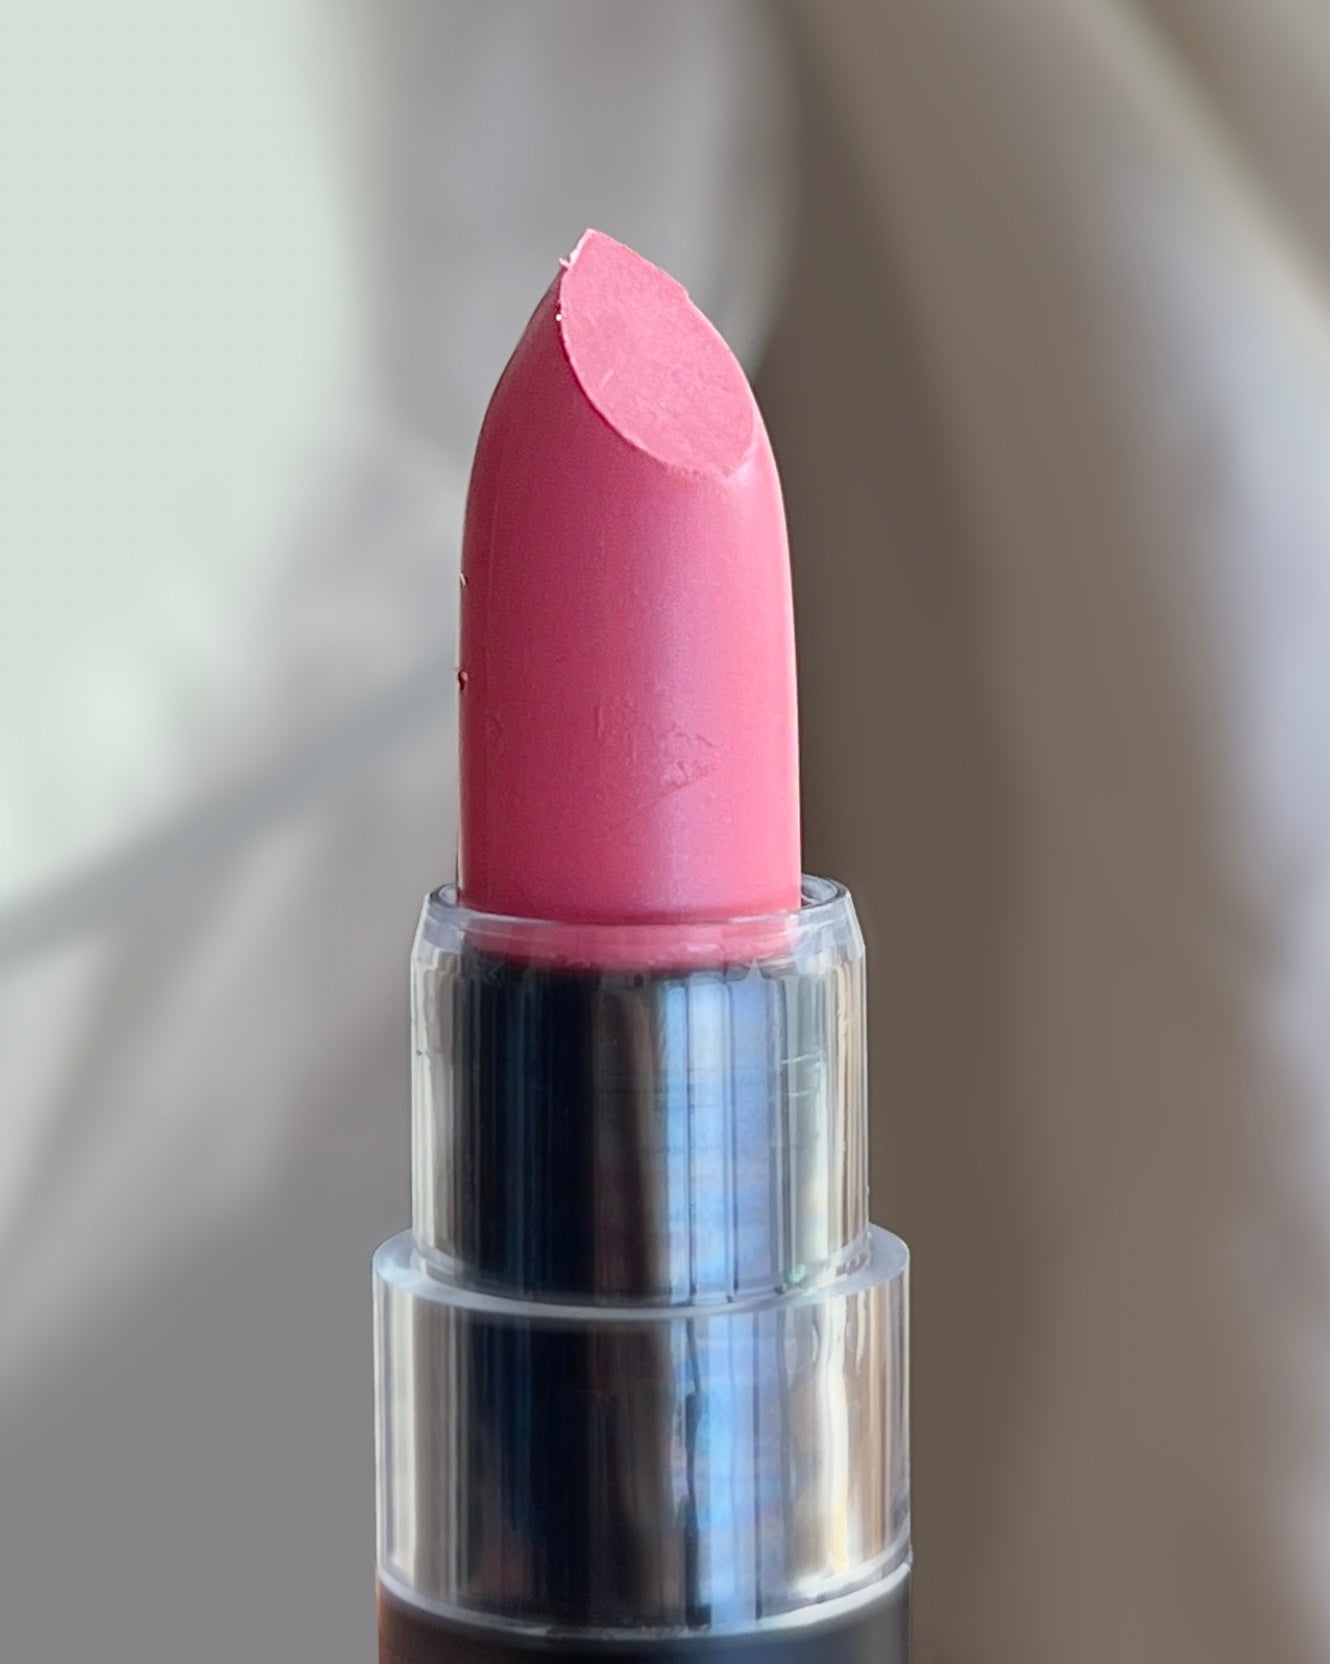 Heal Lipstick – Talc-Free & More! Nutrient-Rich Vegan, Luxe - Yes!